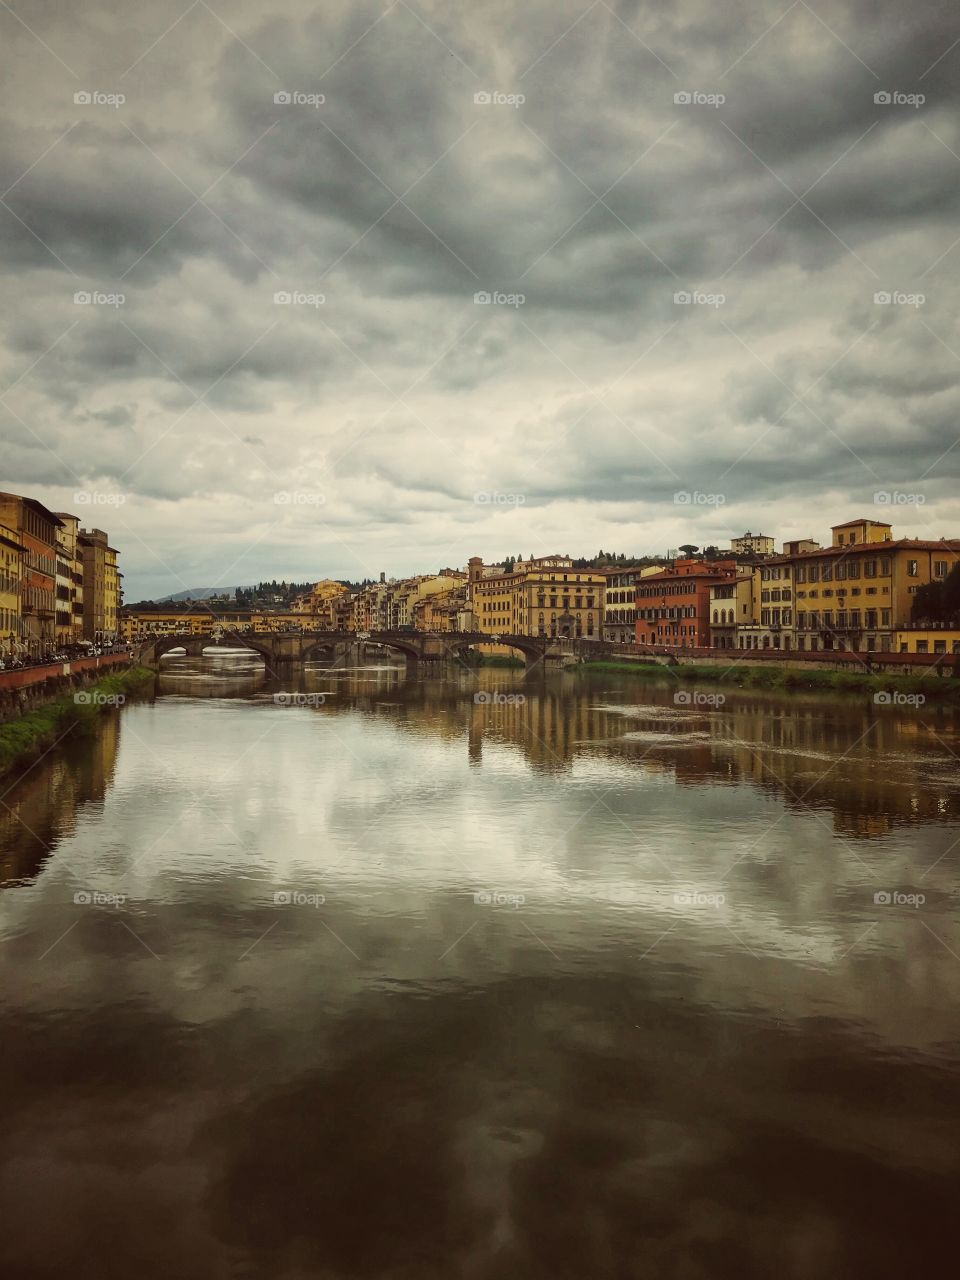 Florence, Italy 